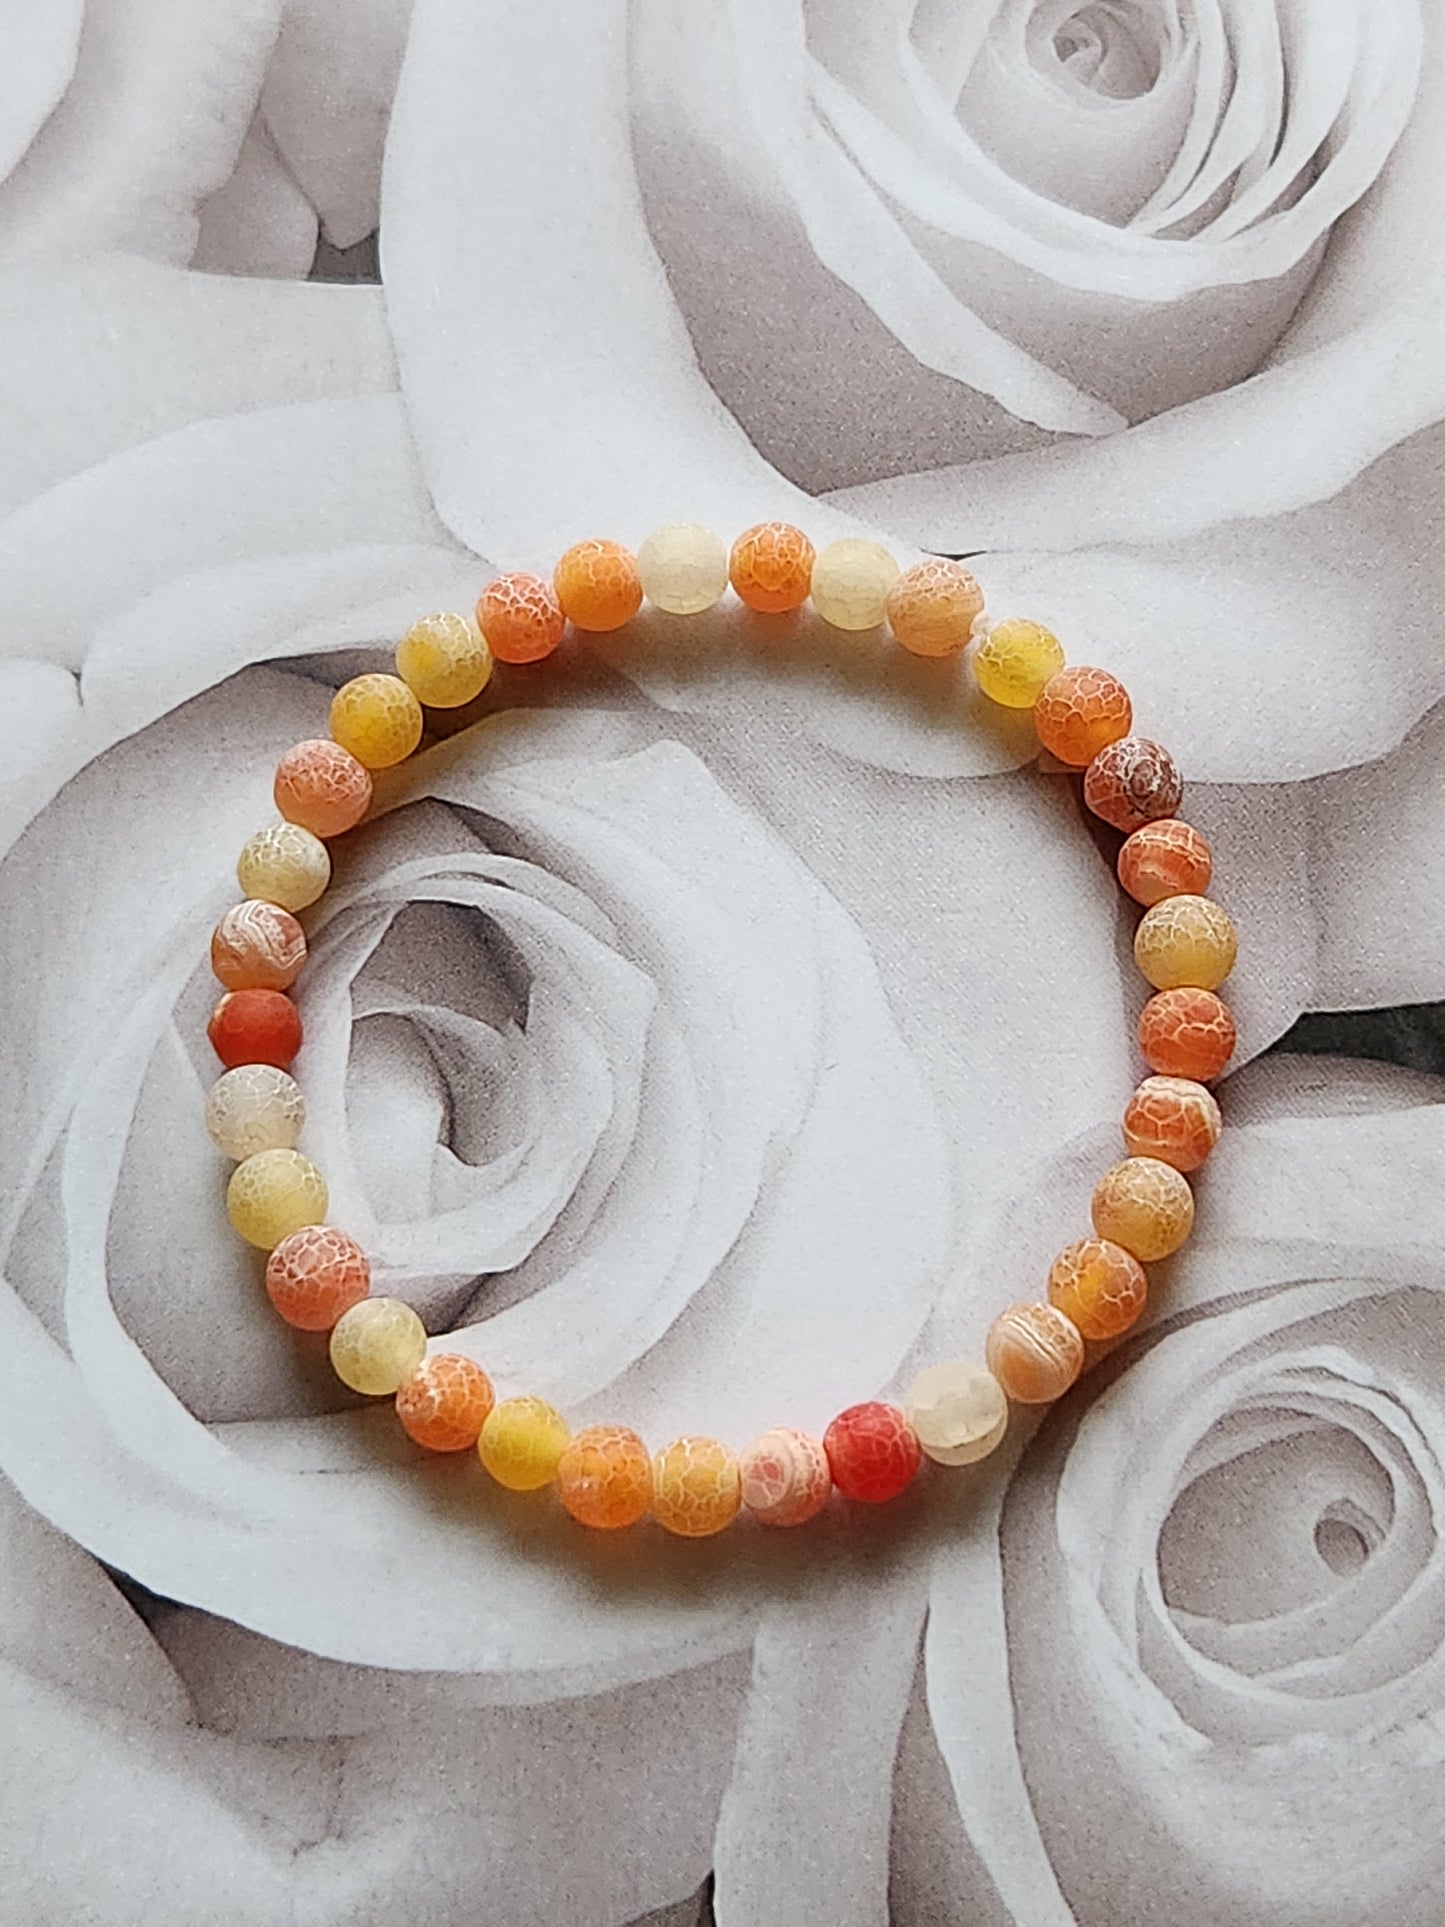 Orange Frosted Crackle Agate - 6mm stones - creativity - healing - confidence - strength